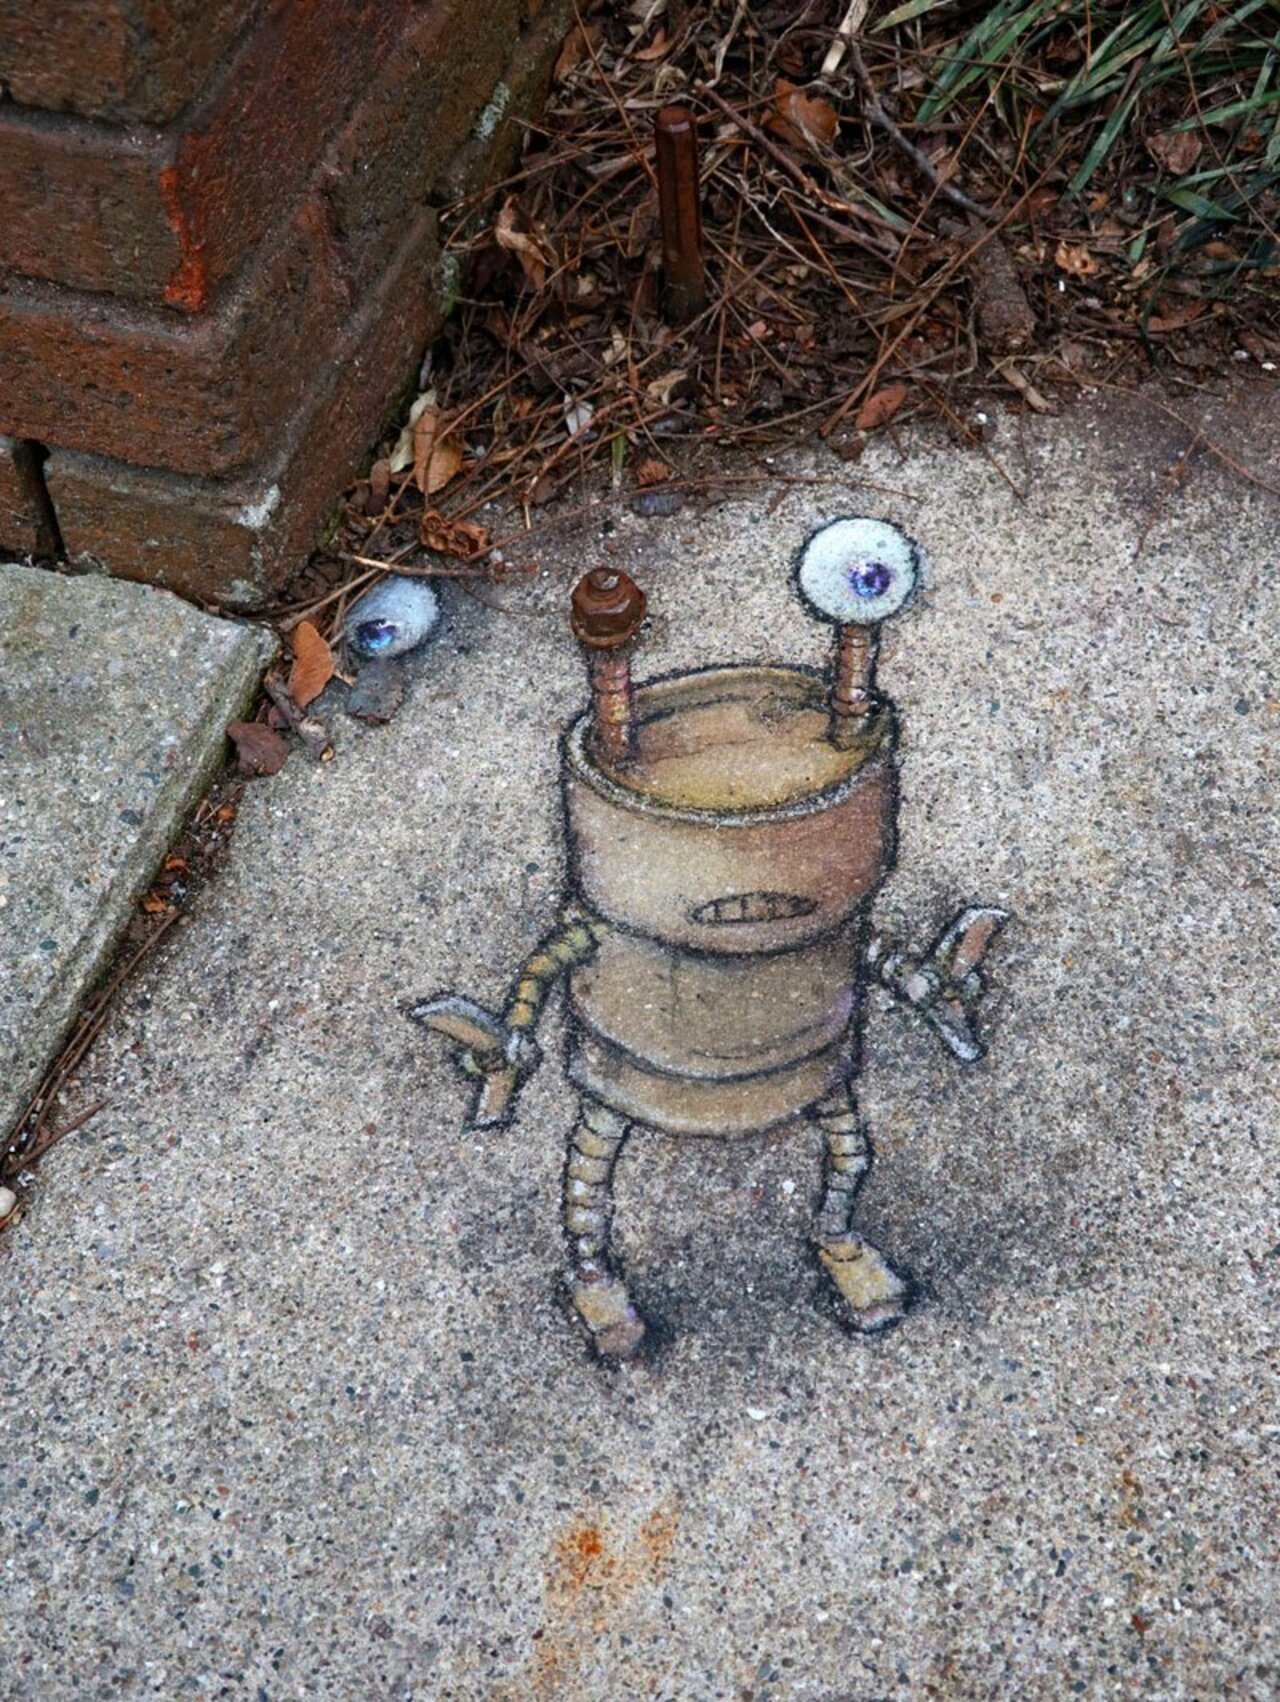 Sluggobot knows better than most that it’s all fun and games until someone loses an eye. #streetart #3Dchalk #graffiti #robot #eyeproblems #depthperception https://t.co/e8aiP65Cba